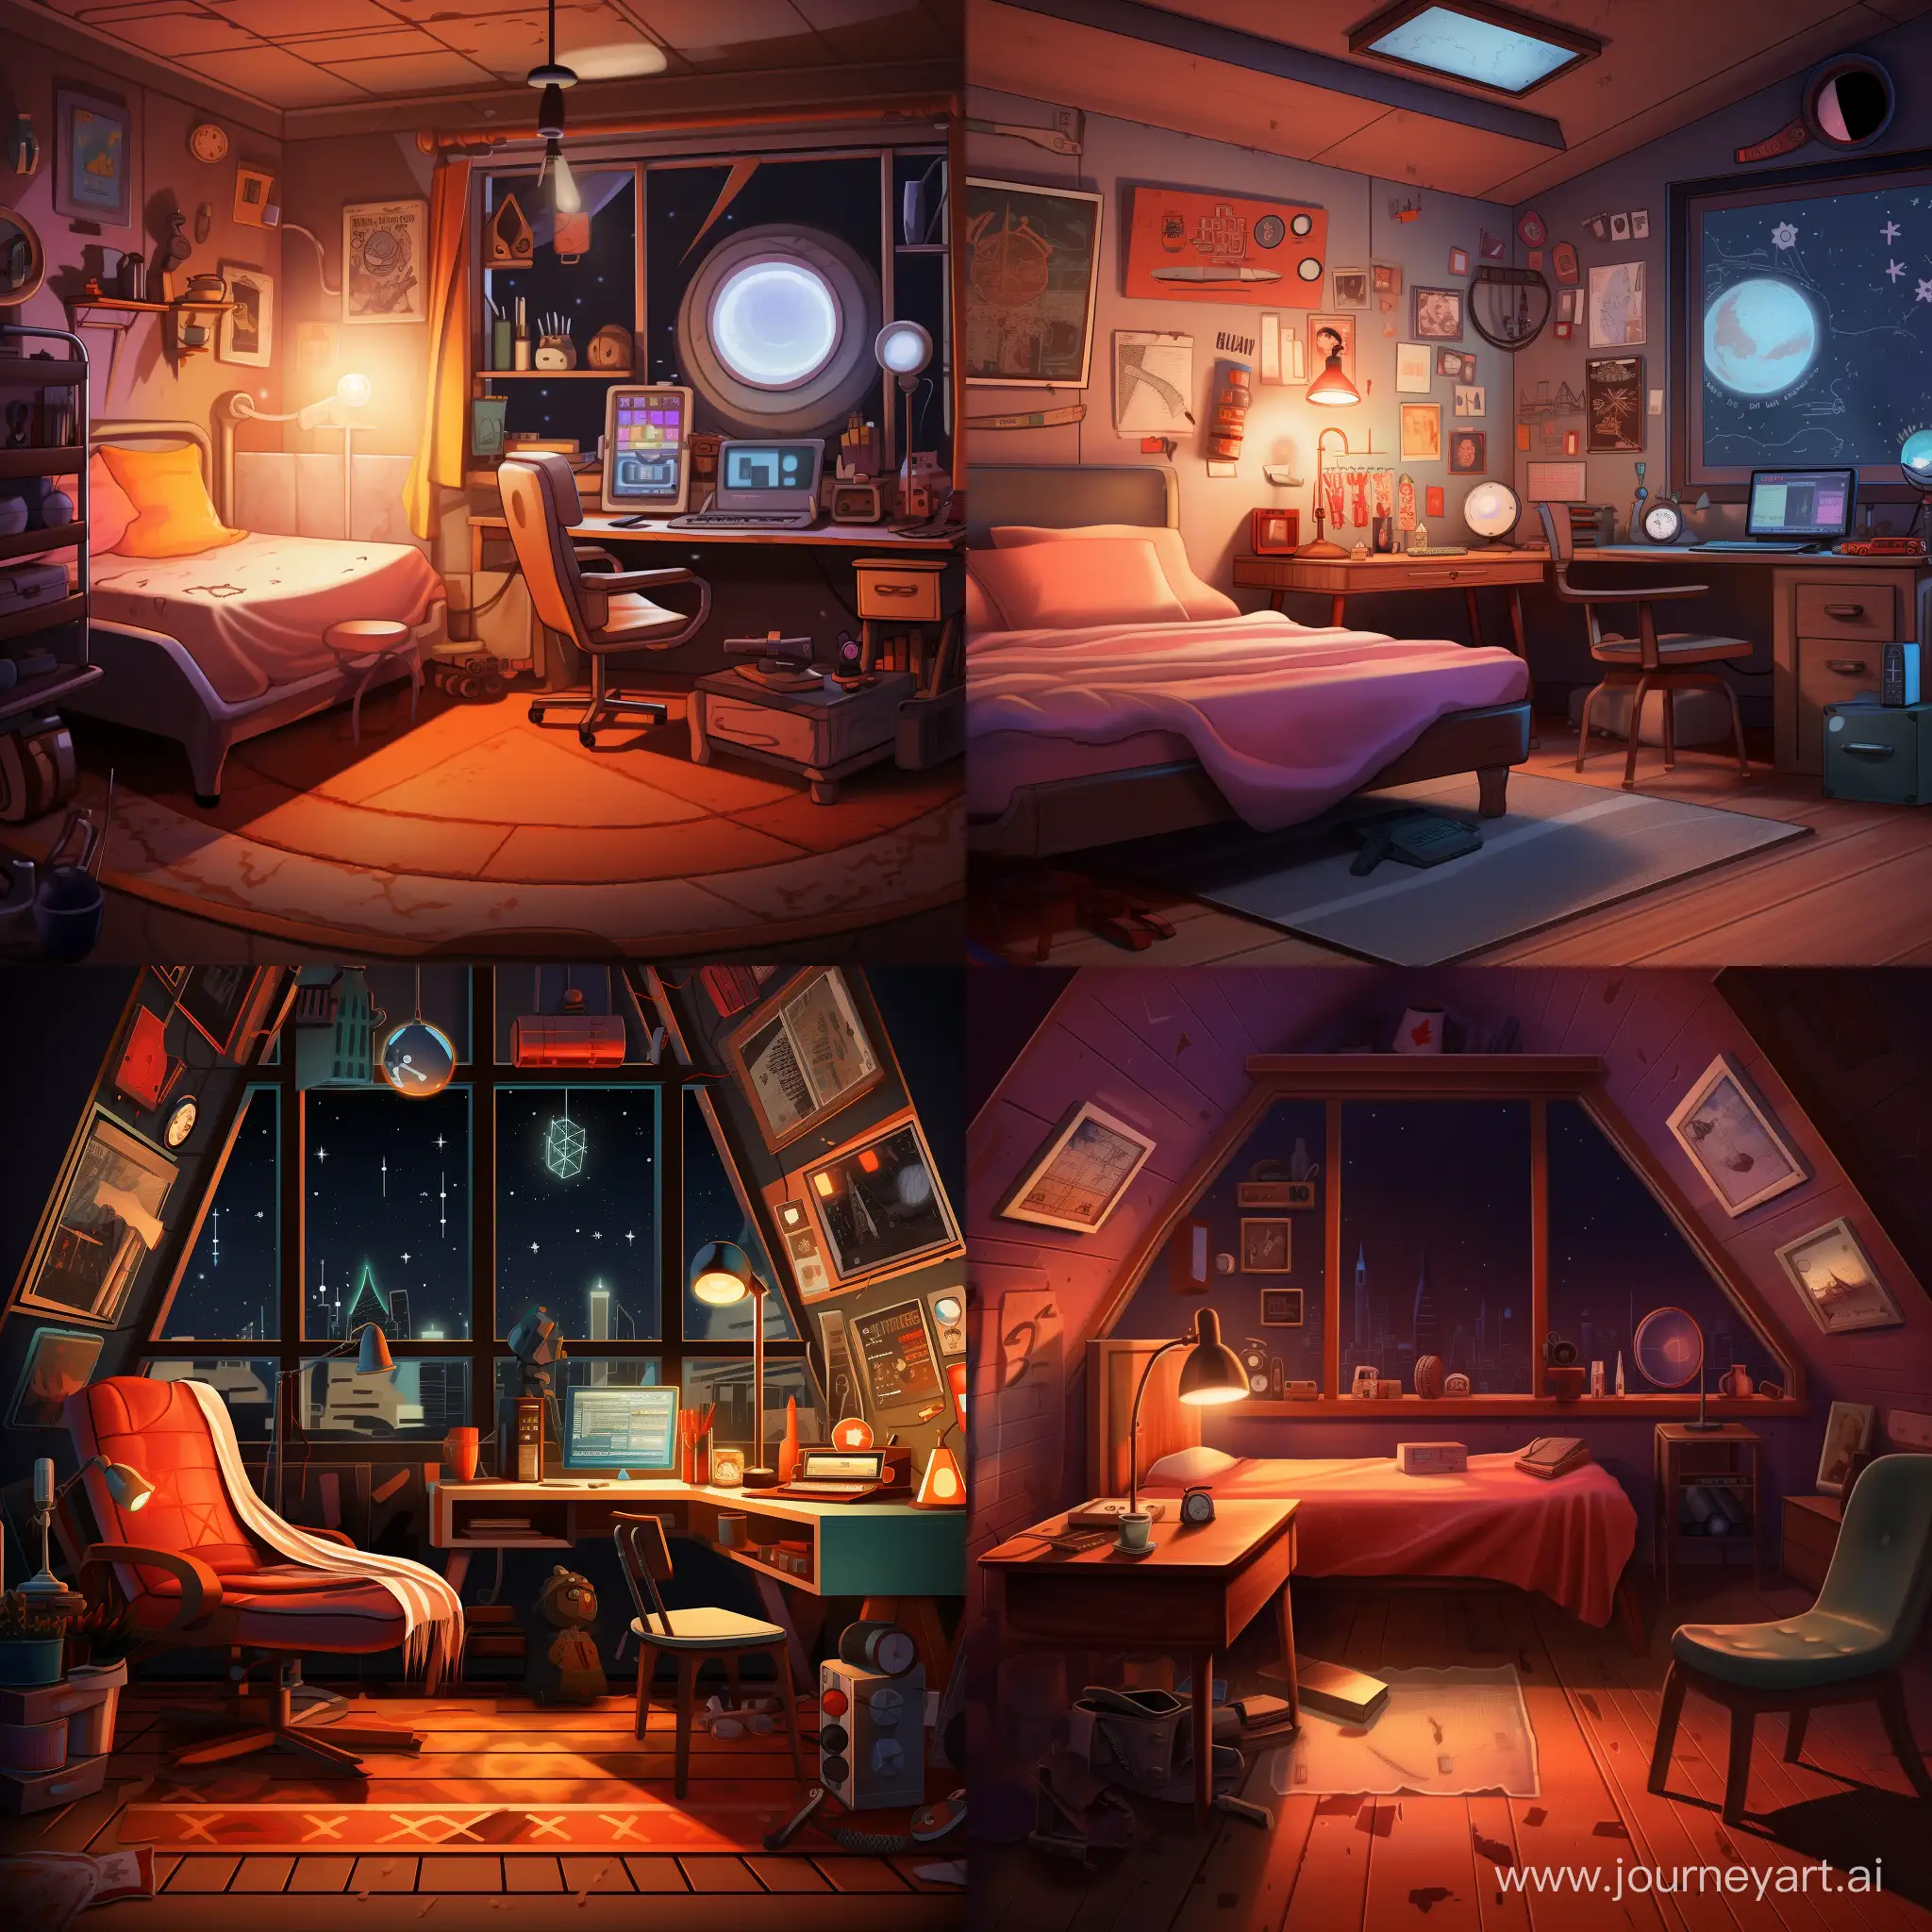 Cozy крохотная dark room in retro futurism style. There is a carefully made bed against the left wall, and a little to the right is a work desk with many mechanisms, diagrams and parts, tools. There is a table lamp on the table, emitting a warm, dim light. She is the only source of light in the room. Офисный стул перед рабочим столом